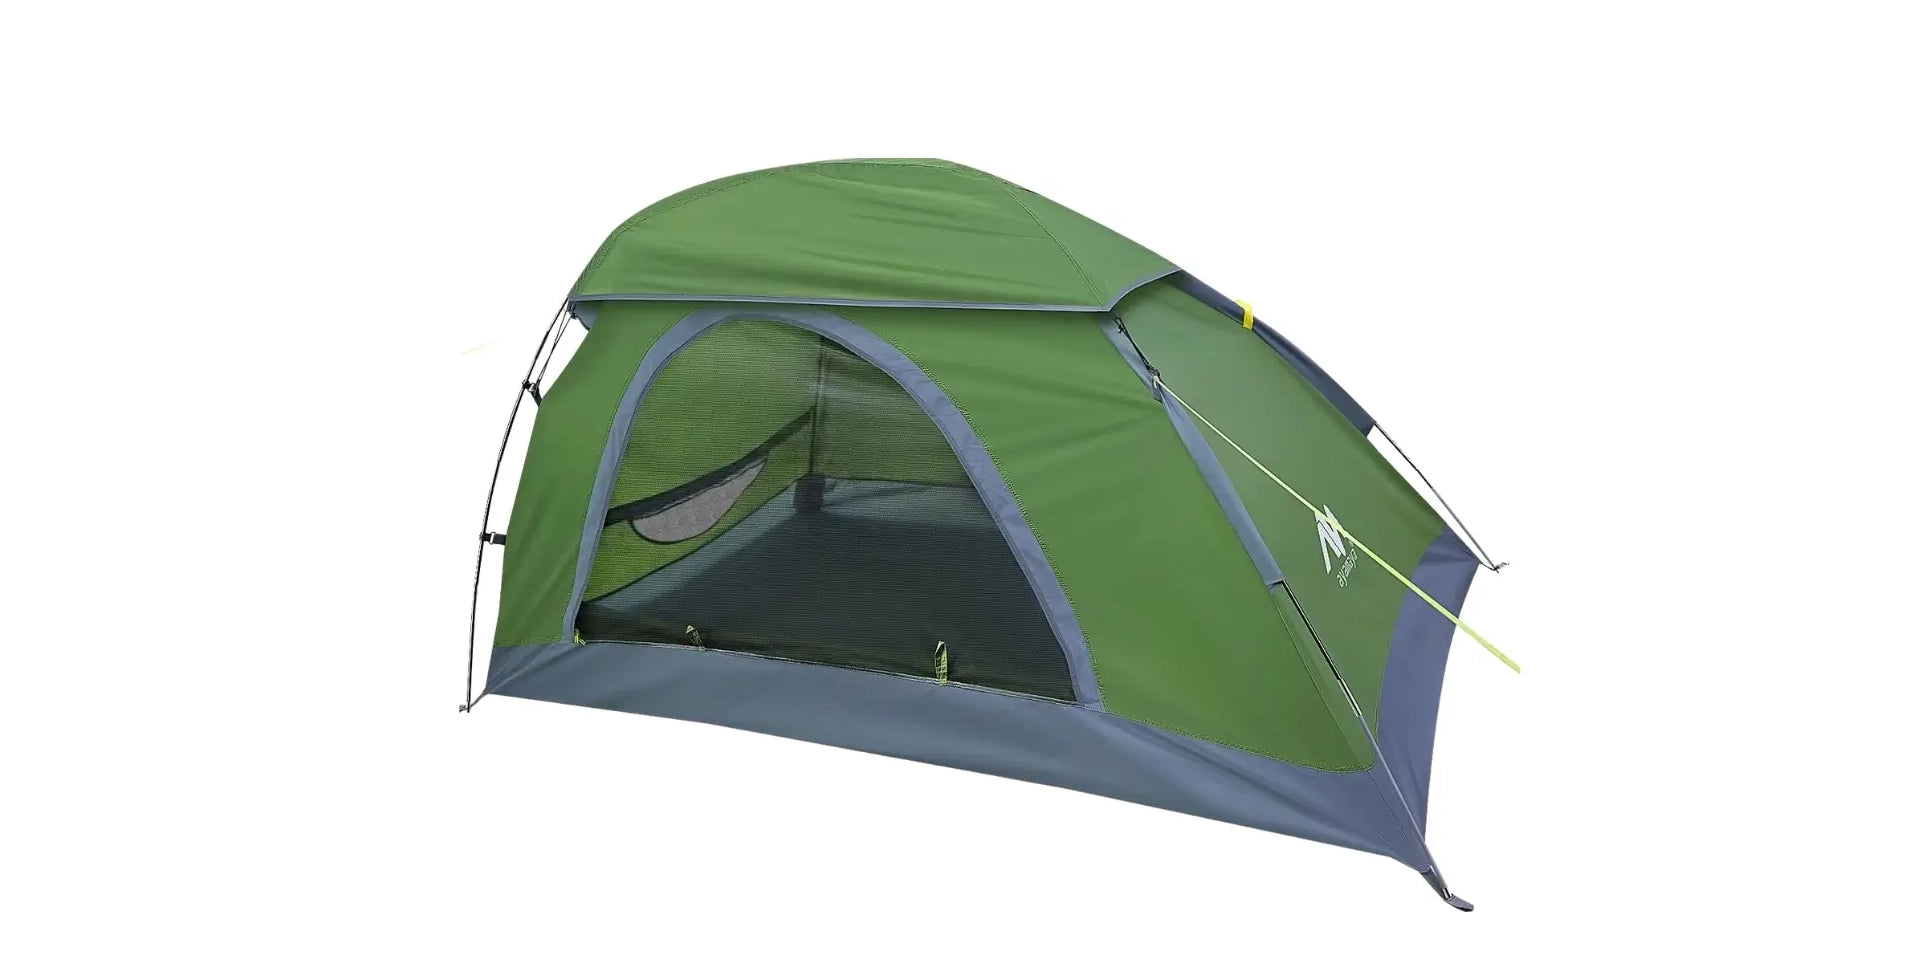 Aether 1P Backpacking Tent Product Review